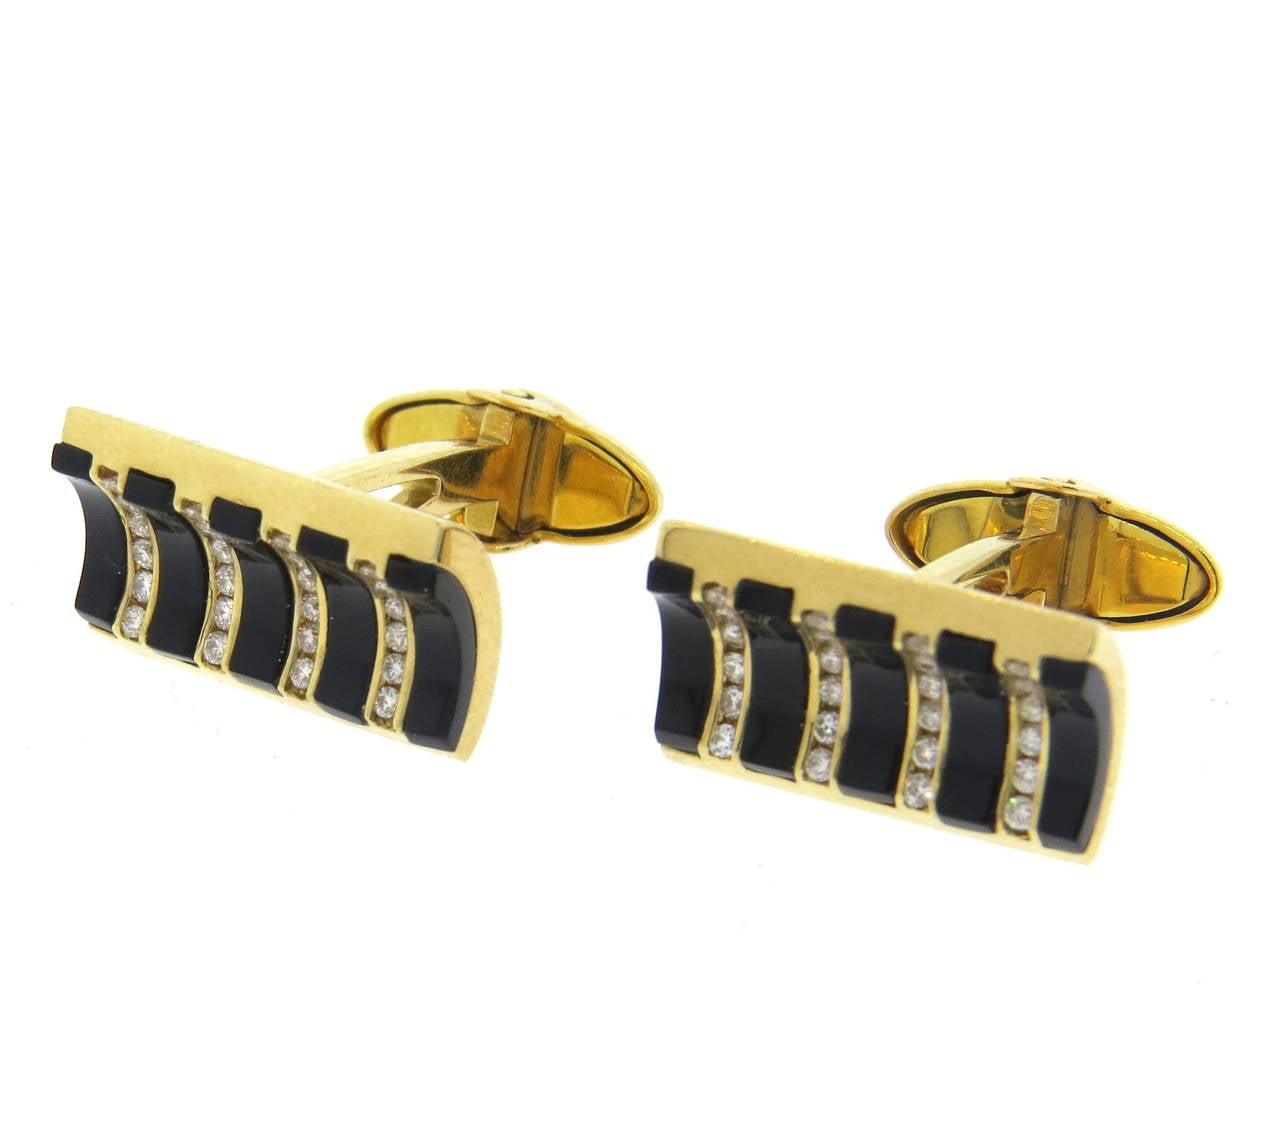 A pair of 18k yellow gold cufflinks, set with approximately 0.40cts in G/VS diamonds and onyx.  The cufflinks measure 19mm x 12mm and weigh 18.9 grams.